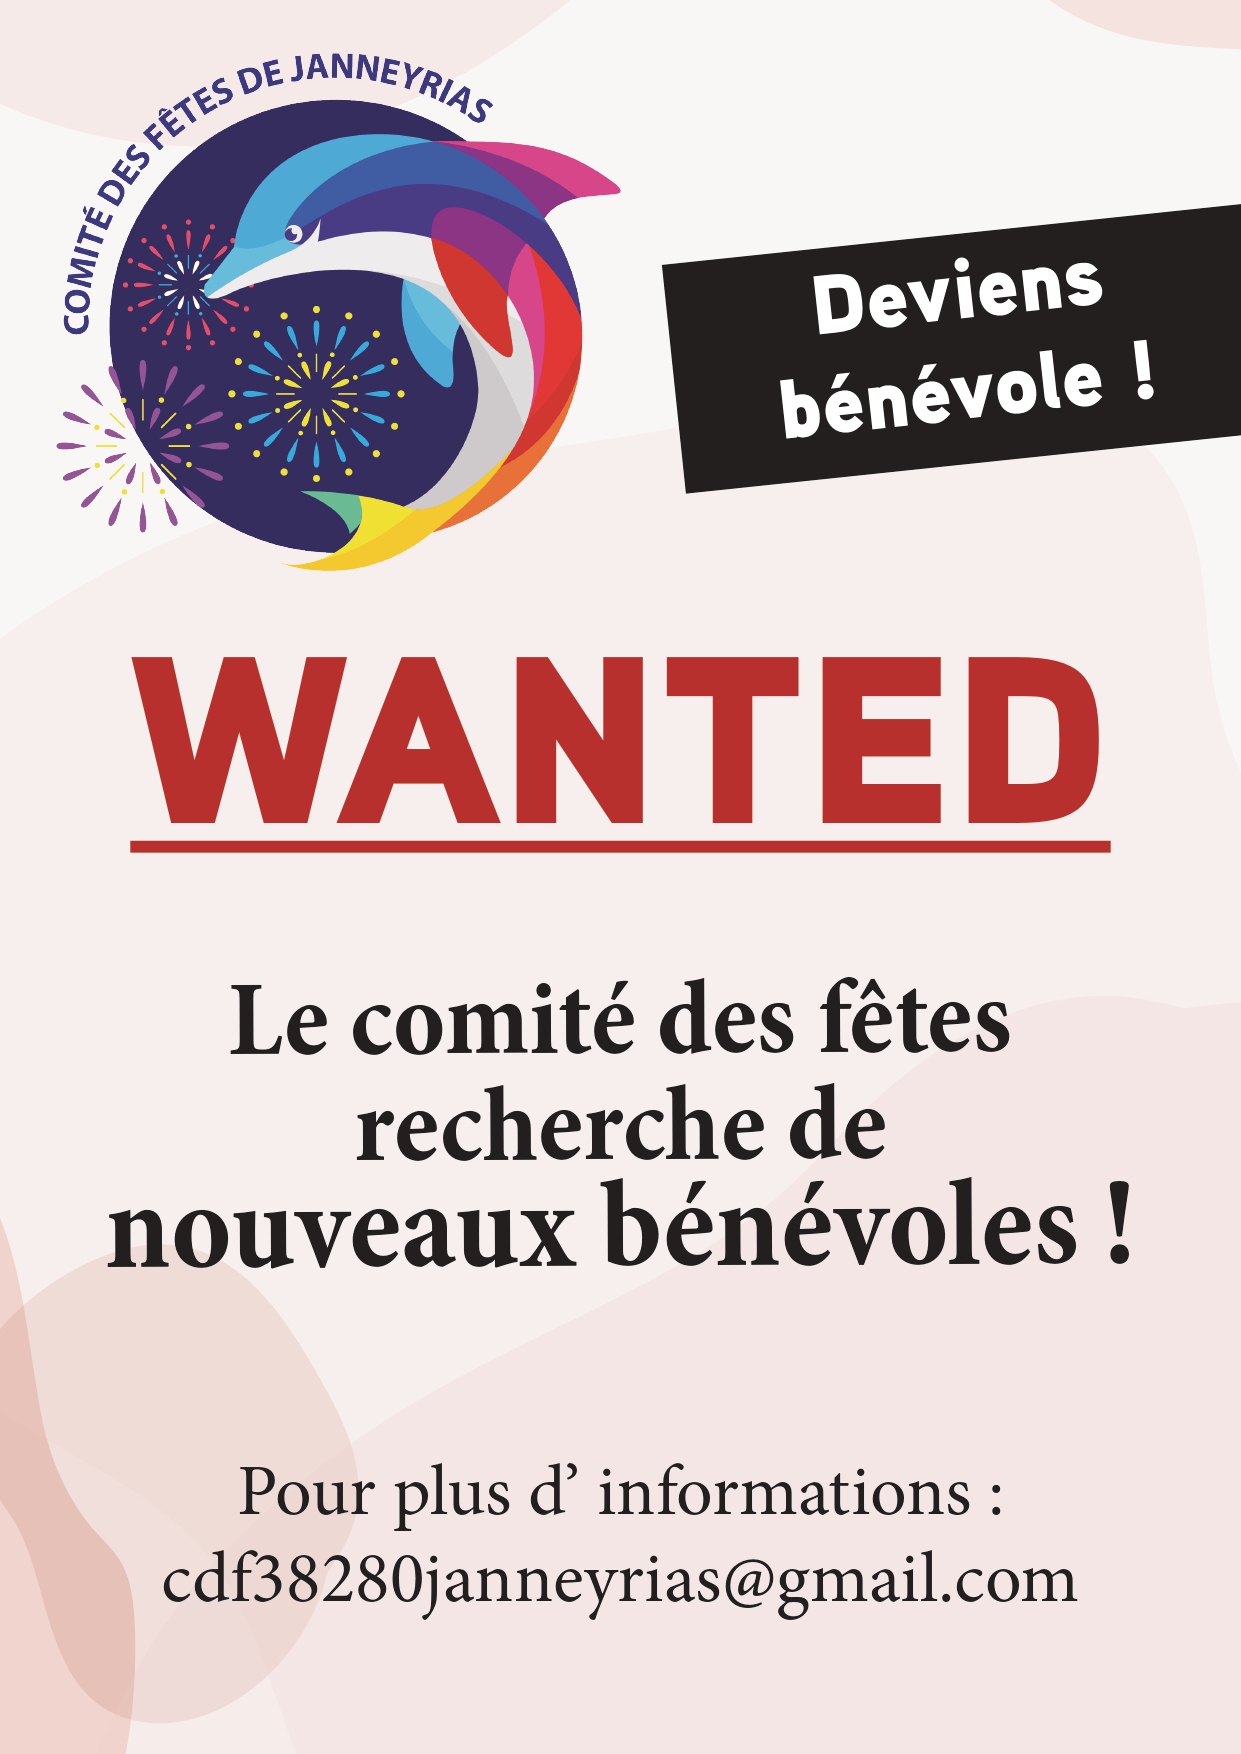 WANTED BENEVOLES_panneaux mairie_page-0001.jpg